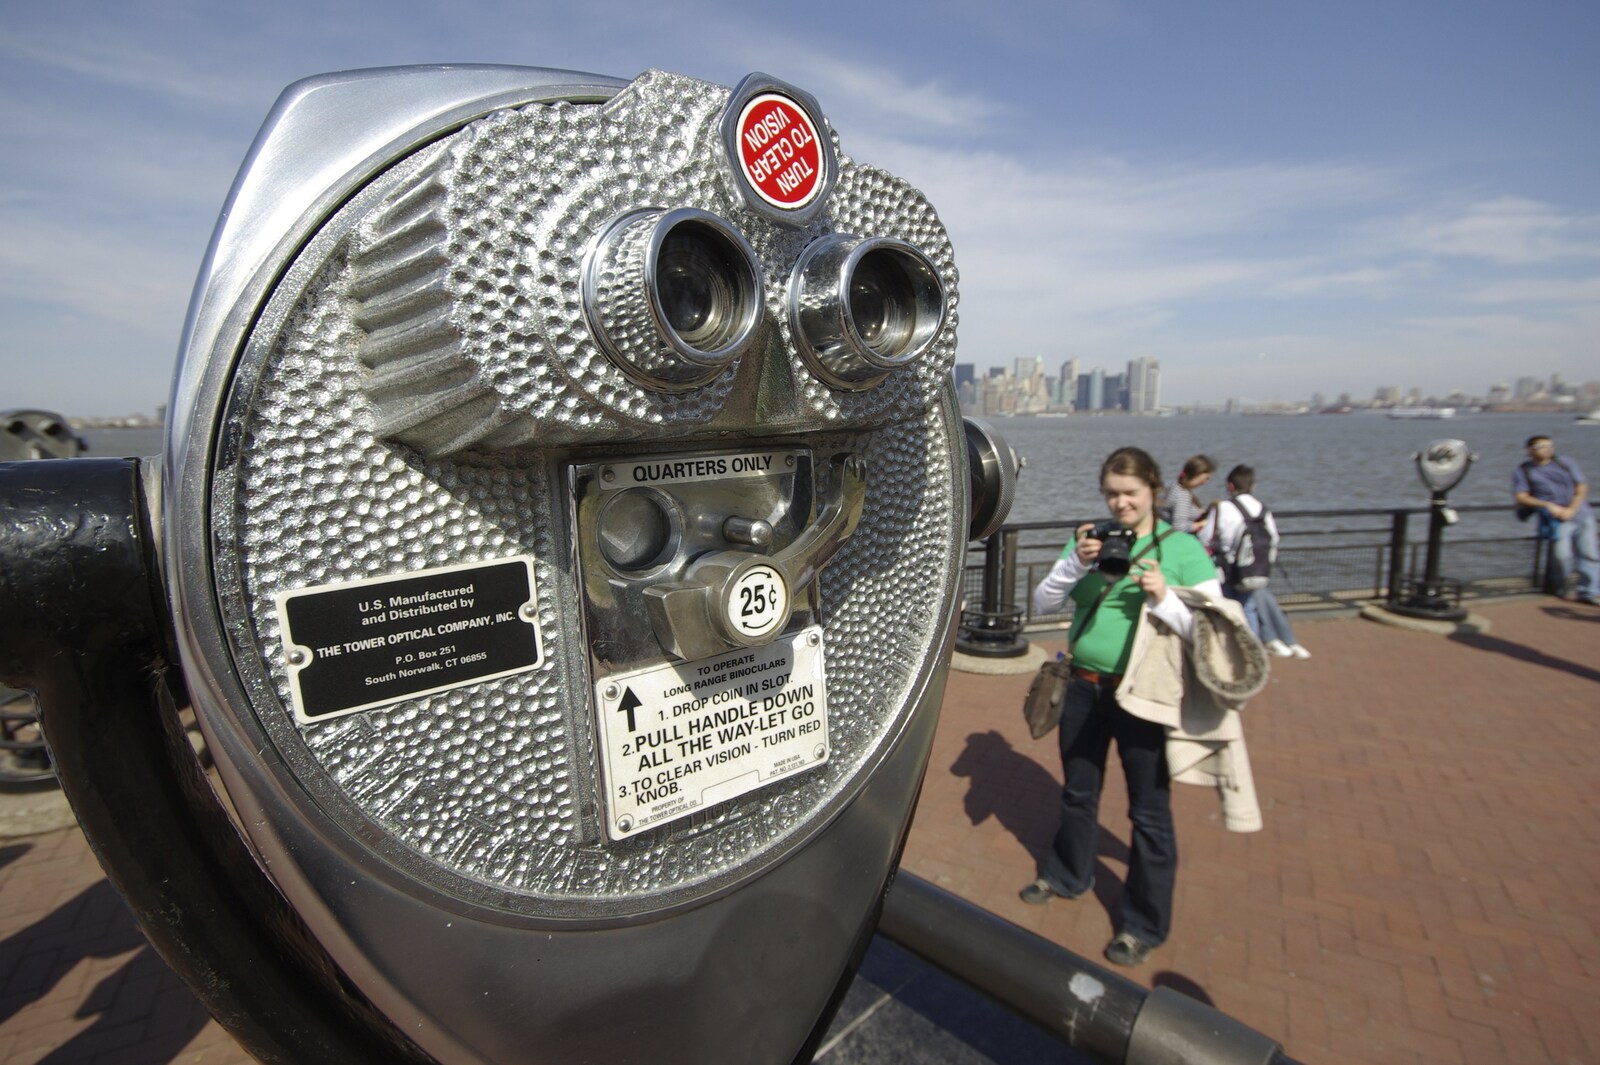 Liberty Island, A Helicopter Trip and Madison Square Basketball, New York, US - 27th March 2007: A 25c telescope